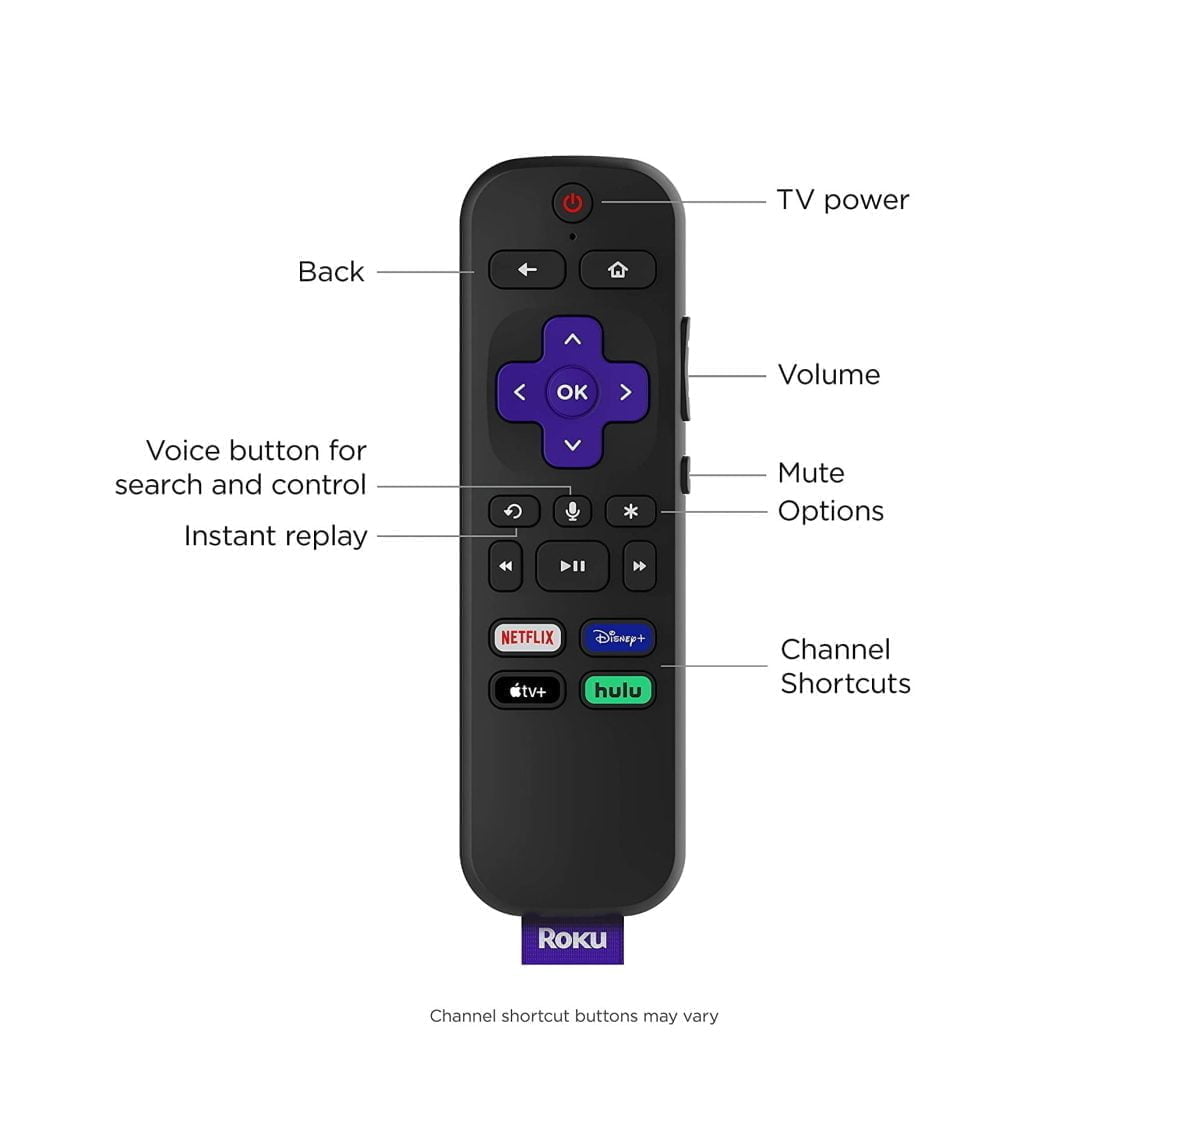 719Tx6Iixl. Ac Sl1500 1 Roku &Lt;H1&Gt;Roku Express 4K+ 2021 | Streaming Media Player Hd/4K/Hdr With Smooth Wireless Streaming And Roku Voice Remote With Tv Controls, Includes Premium Hdmi Cable&Lt;/H1&Gt; &Lt;Ul Class=&Quot;A-Unordered-List A-Vertical A-Spacing-Mini&Quot;&Gt; &Lt;Li&Gt;&Lt;Span Class=&Quot;A-List-Item&Quot;&Gt;Brilliant 4K Picture Quality: Stream In Hd, 4K, And Hdr With Sharp Resolution And Vivid Color Optimized For Your Tv&Lt;/Span&Gt;&Lt;/Li&Gt; &Lt;Li&Gt;&Lt;Span Class=&Quot;A-List-Item&Quot;&Gt;Smooth Wireless Streaming: Now Featuring Dual-Band Wireless, Enjoy A Smooth Streaming Experience With Faster Wireless Performance, Even With Multiple Devices Connected To Your Network&Lt;/Span&Gt;&Lt;/Li&Gt; &Lt;Li&Gt;&Lt;Span Class=&Quot;A-List-Item&Quot;&Gt;No More Juggling Remotes: Power Up Your Tv, Adjust The Volume, Mute, And Control Your Roku Device All With One Remote&Lt;/Span&Gt;&Lt;/Li&Gt; &Lt;Li&Gt;&Lt;Span Class=&Quot;A-List-Item&Quot;&Gt;Convenient Voice Control: Use Your Voice To Quickly Search Across Channels, Turn Captions On, And More In A Touch&Lt;/Span&Gt;&Lt;/Li&Gt; &Lt;Li&Gt;&Lt;Span Class=&Quot;A-List-Item&Quot;&Gt;Upgrade To Roku Streaming: All Of Your Favorite Channels, Like Hbo Max, Netflix, Youtube Tv, And Prime Video, Are Front And Center On The Customizable Home Screen, Plus Your Device Is Always Getting Better With Automatic Updates&Lt;/Span&Gt;&Lt;/Li&Gt; &Lt;Li&Gt;&Lt;Span Class=&Quot;A-List-Item&Quot;&Gt;Simple Setup: It’s Easy To Get Started With Everything You Need Included In The Box, Including A Premium Hdmi Cable—Just Plug It In And Connect To The Internet&Lt;/Span&Gt;&Lt;/Li&Gt; &Lt;Li&Gt;&Lt;Span Class=&Quot;A-List-Item&Quot;&Gt;Save Money, Stream Big: Watch What You Love, Including A Massive Selection Of Free And Live Tv, Including 150+ Live Tv Channels Free On The Roku Channel—It’s Great For Streaming Tv And Cutting Cable&Lt;/Span&Gt;&Lt;/Li&Gt; &Lt;/Ul&Gt; &Lt;Div Class=&Quot;A-Row A-Expander-Container A-Expander-Inline-Container&Quot; Aria-Live=&Quot;Polite&Quot;&Gt; &Lt;Div Class=&Quot;A-Expander-Content A-Expander-Extend-Content A-Expander-Content-Expanded&Quot; Aria-Expanded=&Quot;True&Quot;&Gt; &Lt;Ul Class=&Quot;A-Unordered-List A-Vertical A-Spacing-None&Quot;&Gt; &Lt;Li&Gt;&Lt;Span Class=&Quot;A-List-Item&Quot;&Gt;Works With Popular Voice Assistants: Enjoy Easy Voice Control With Siri, Alexa, Or Hey Google&Lt;/Span&Gt;&Lt;/Li&Gt; &Lt;Li&Gt;&Lt;Span Class=&Quot;A-List-Item&Quot;&Gt;Share It With Apple Airplay: Effortlessly Share Videos, Photos, Music, And More From Your Apple Devices To Your Tv.&Lt;/Span&Gt;&Lt;/Li&Gt; &Lt;/Ul&Gt; &Lt;/Div&Gt; &Lt;/Div&Gt; Roku Express 4K+ 2021 Roku Express 4K+ 2021 | Streaming Media Player Hd/4K/Hdr With Smooth Wireless Streaming And Roku Voice Remote With Tv Controls, Includes Premium Hdmi Cable